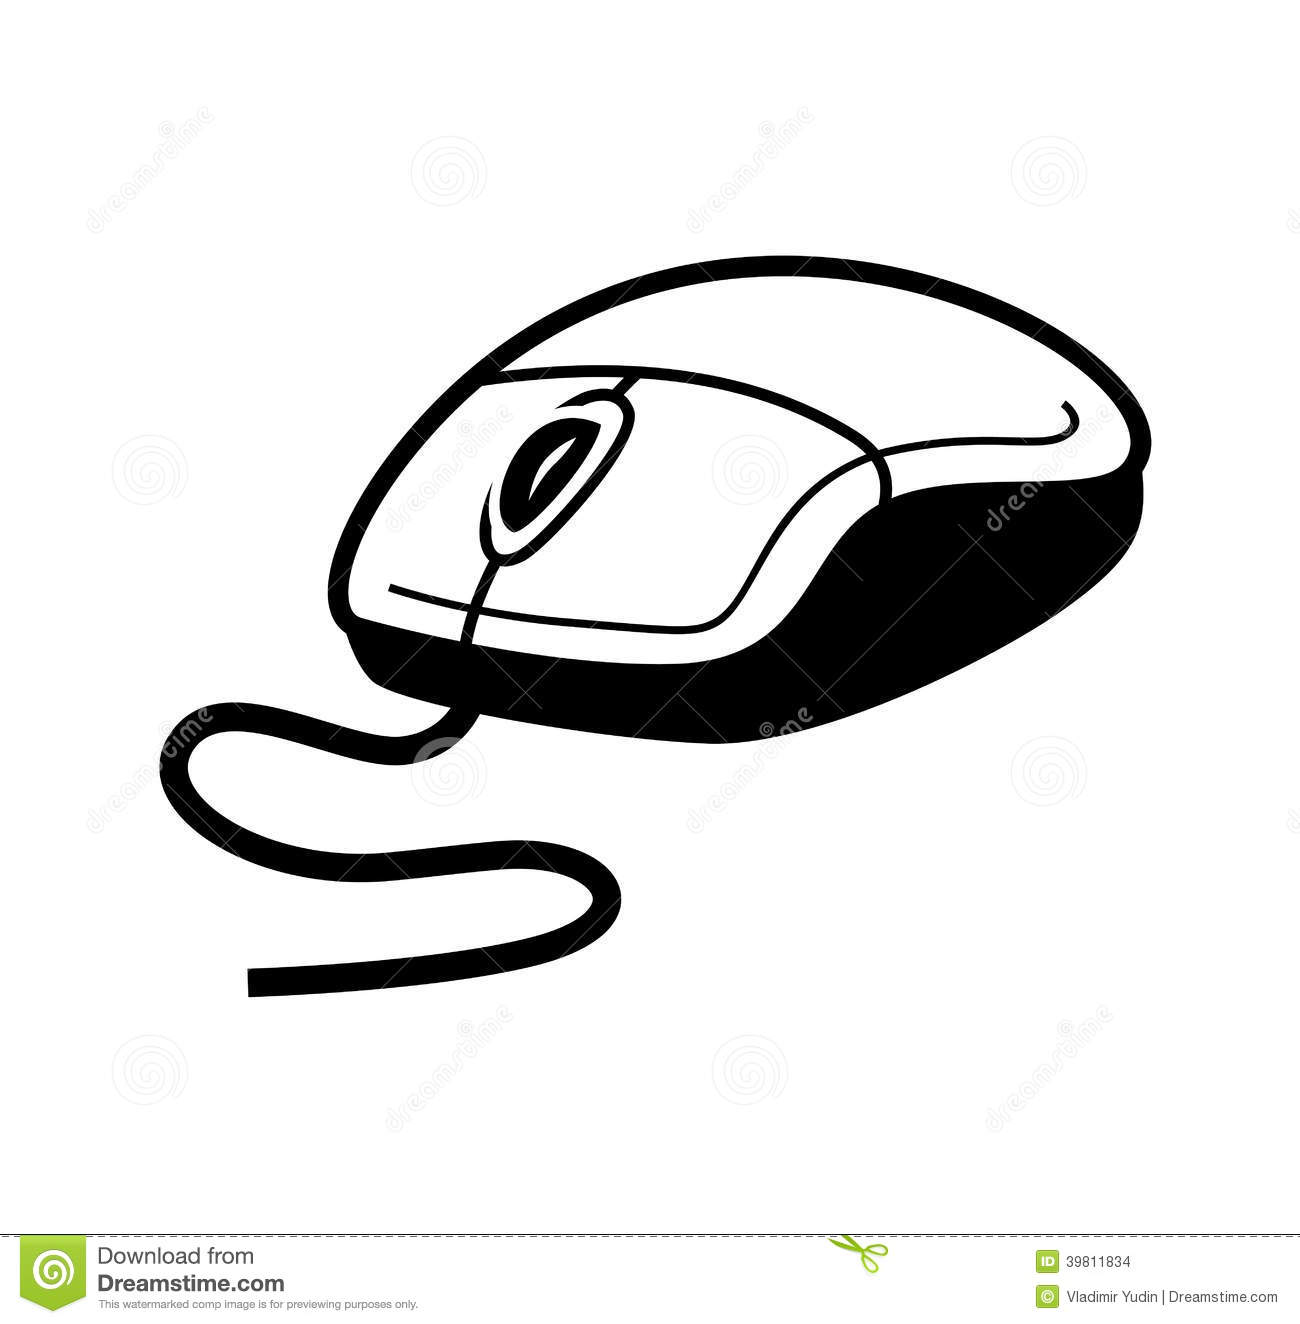 7 Computer Mouse Vector Images